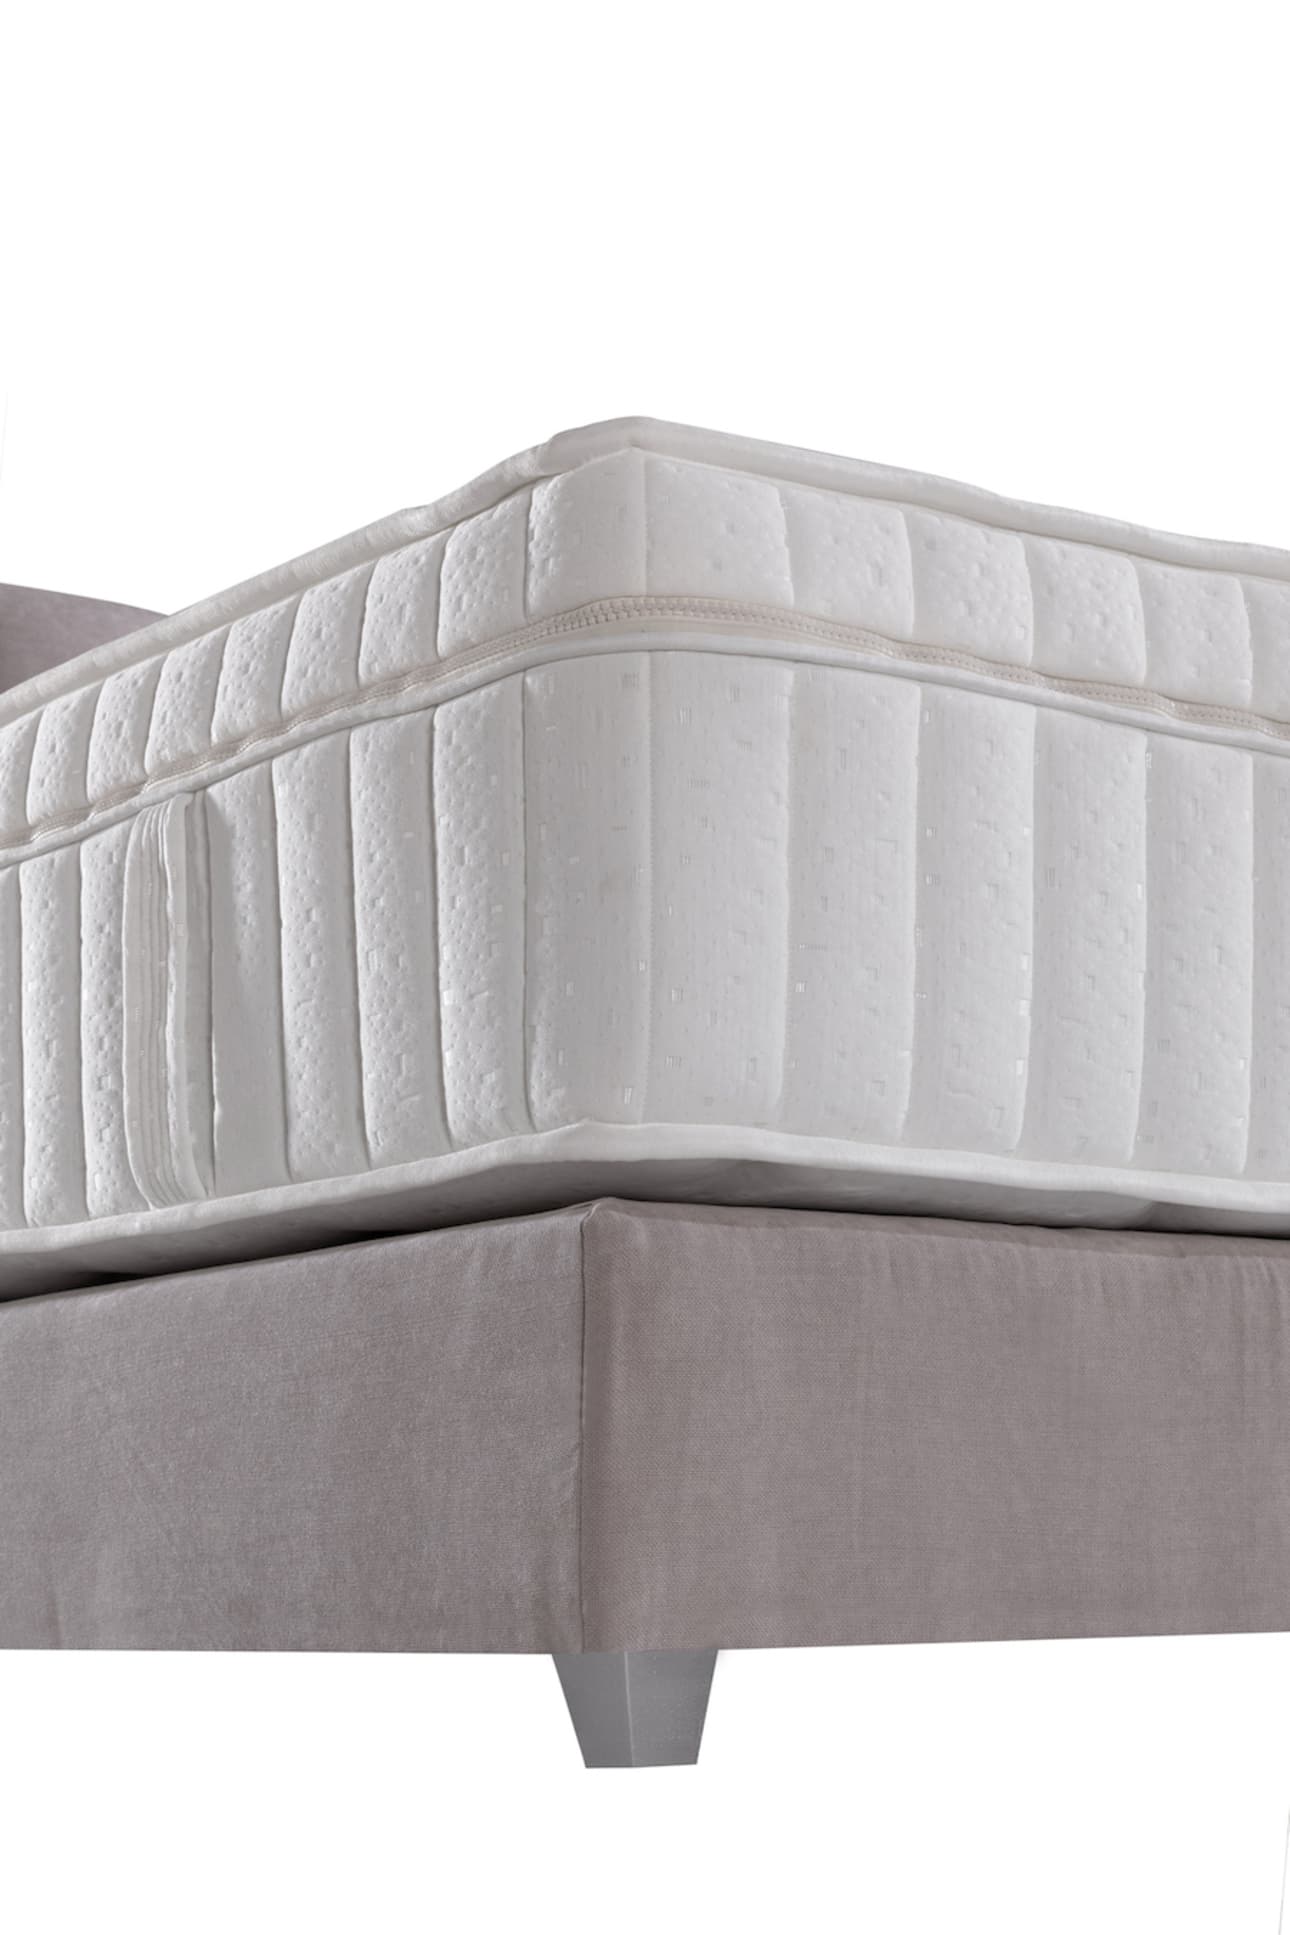 Boxspringbett Vertical in Hell-Taupe (200x200cm)